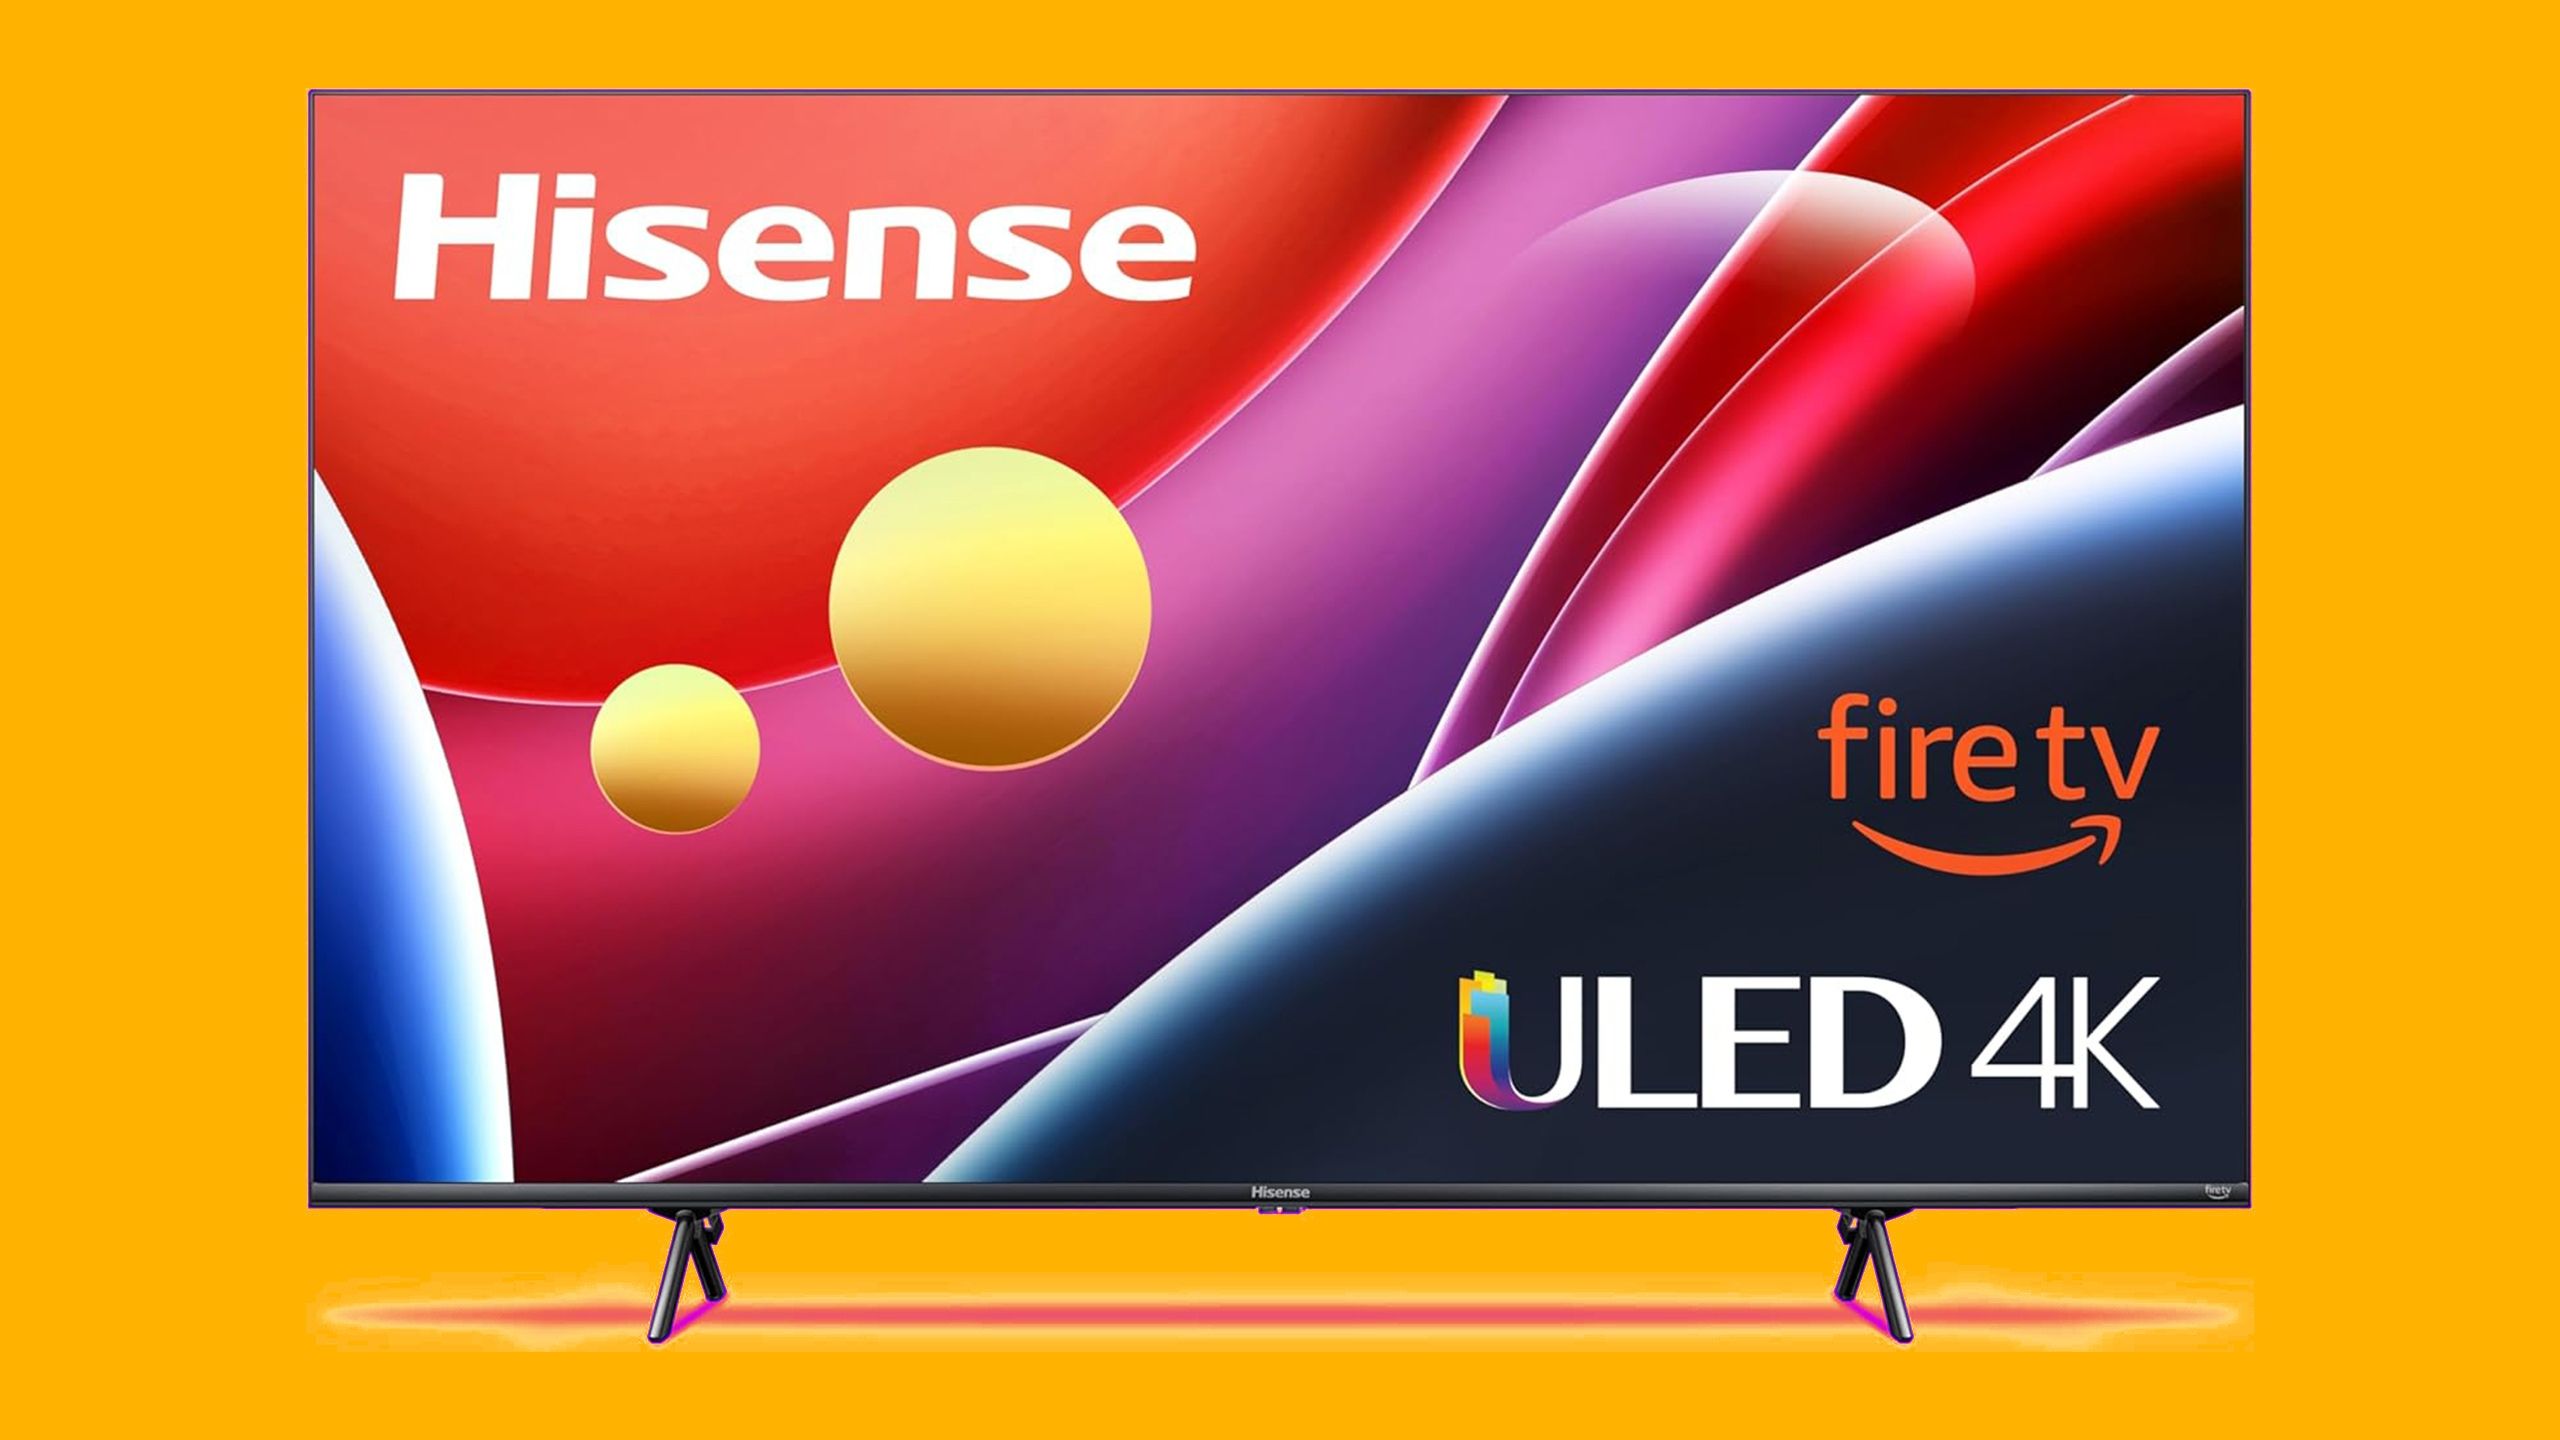 Hisense Amazon Fire TV on a colored background